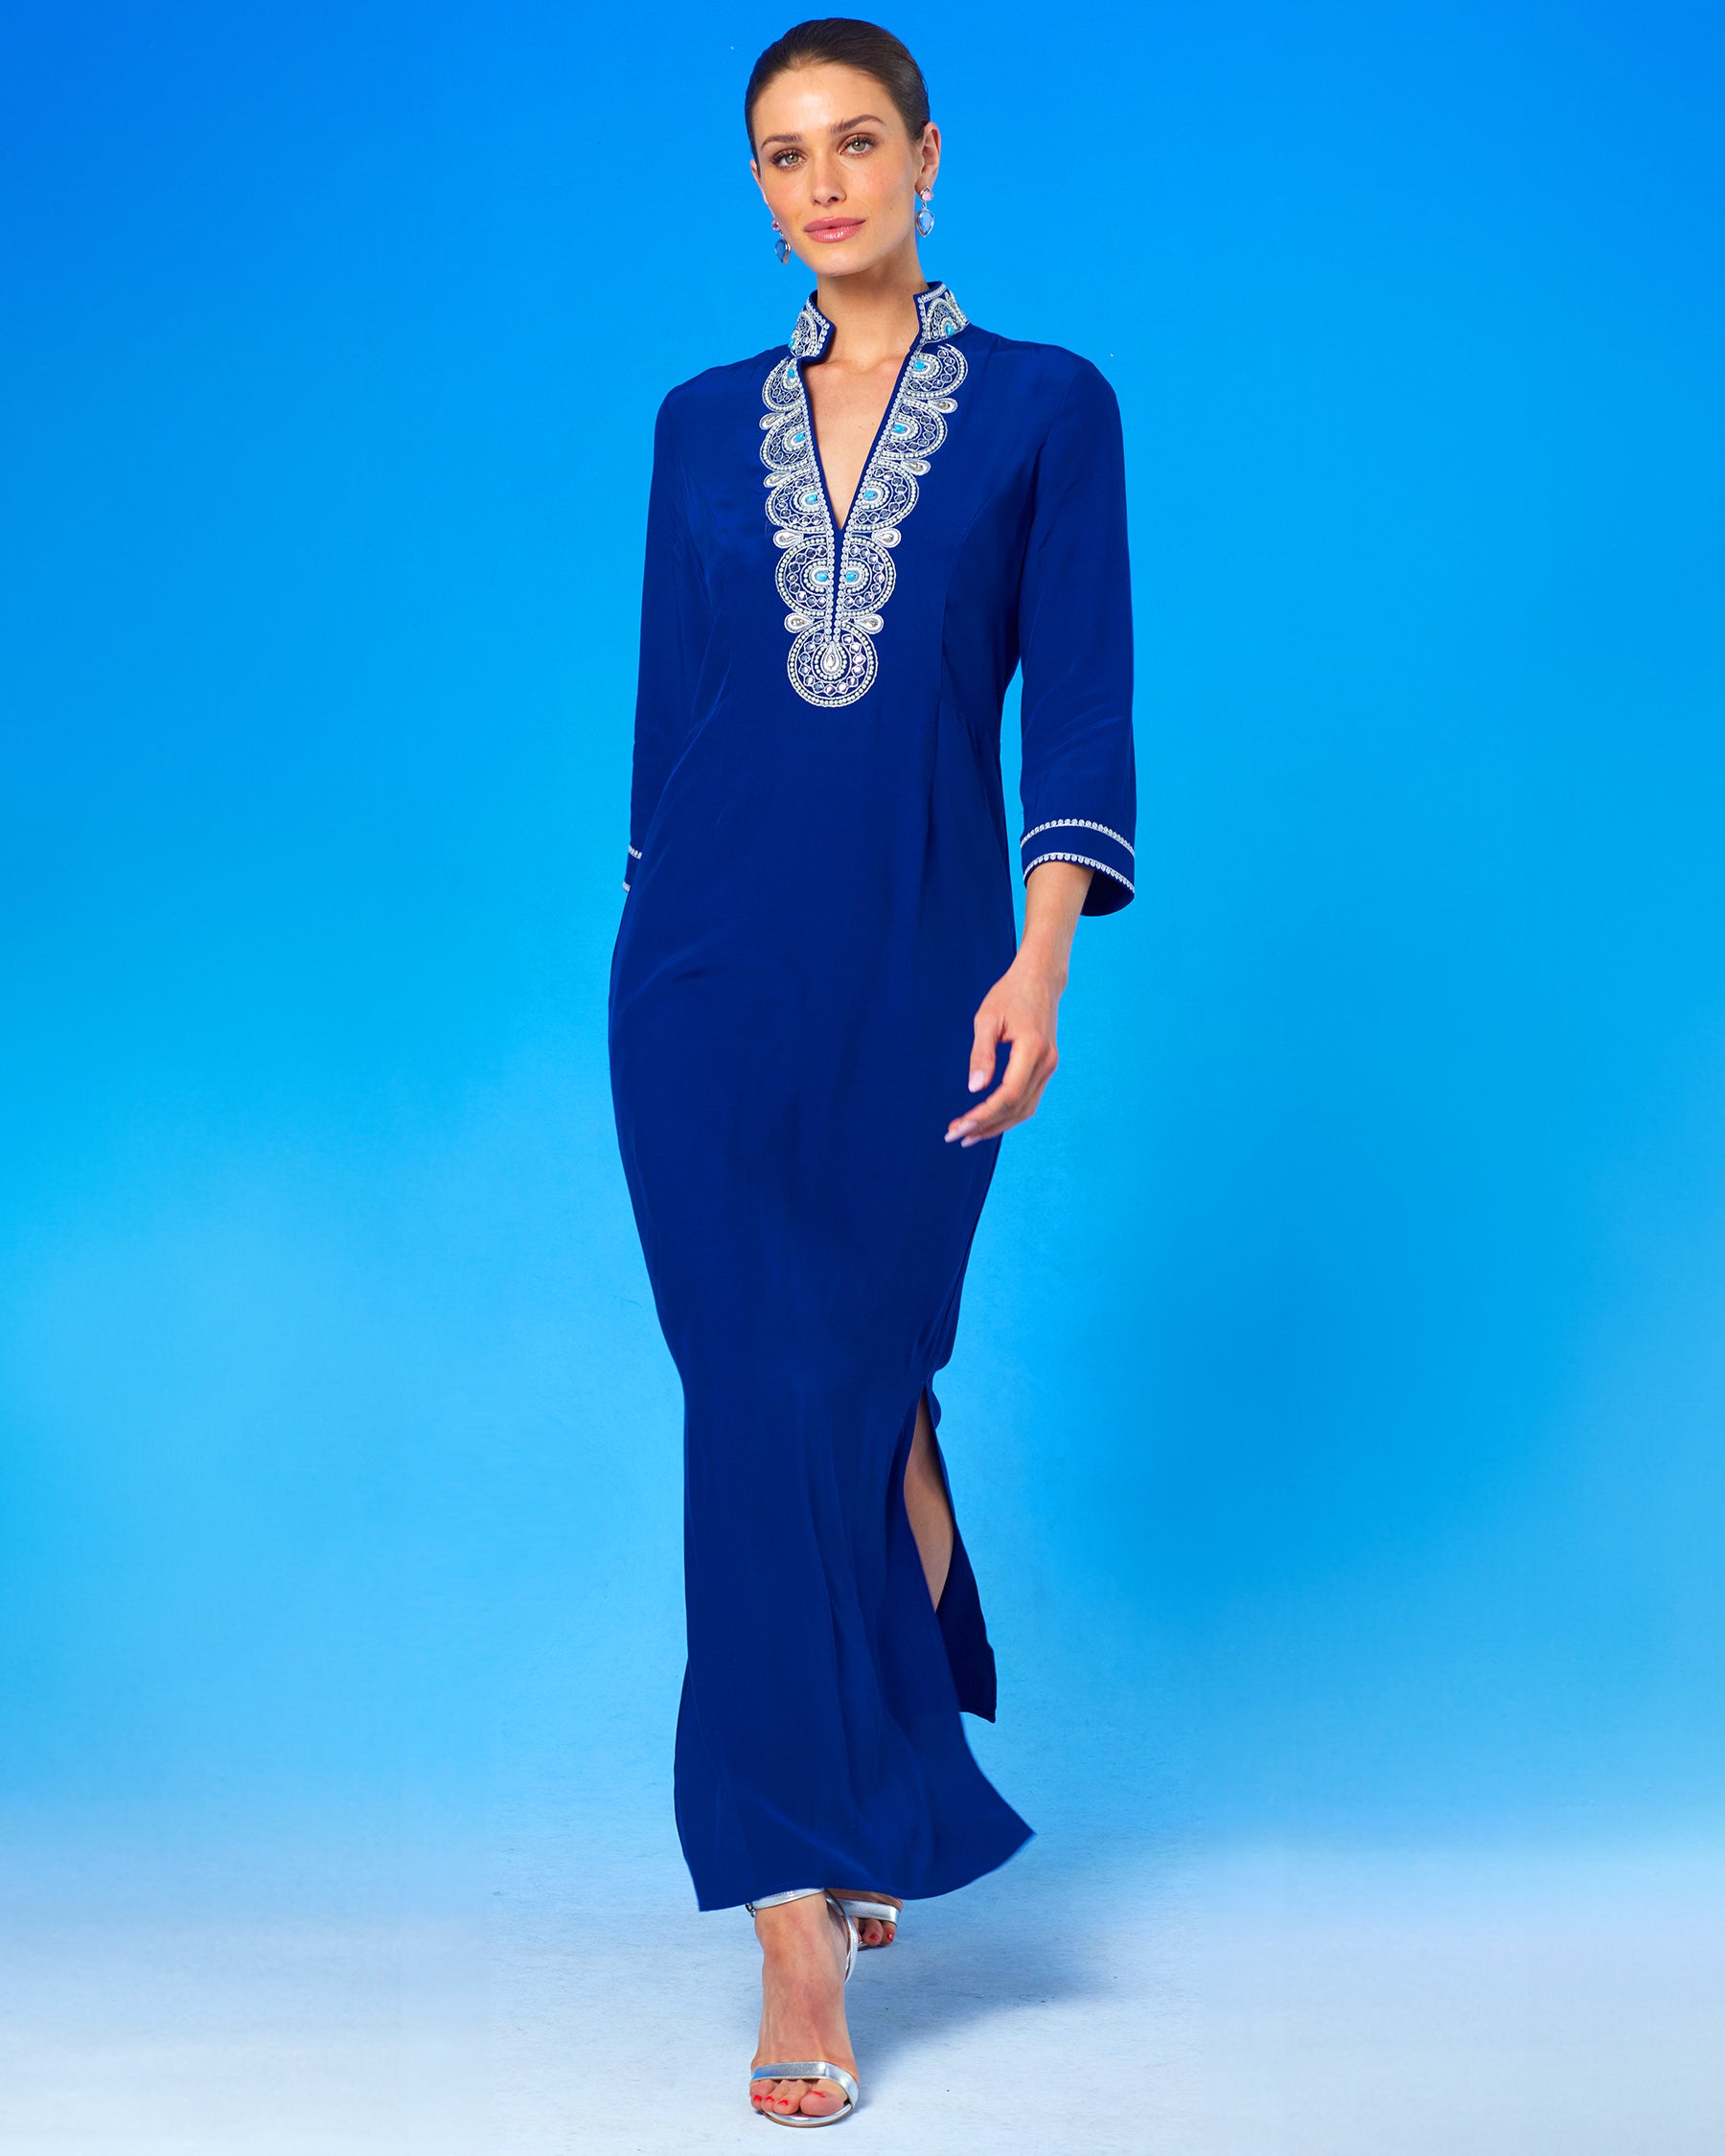 Noor Long Navy Tunic Dress with Silver Embellishment-walking front view